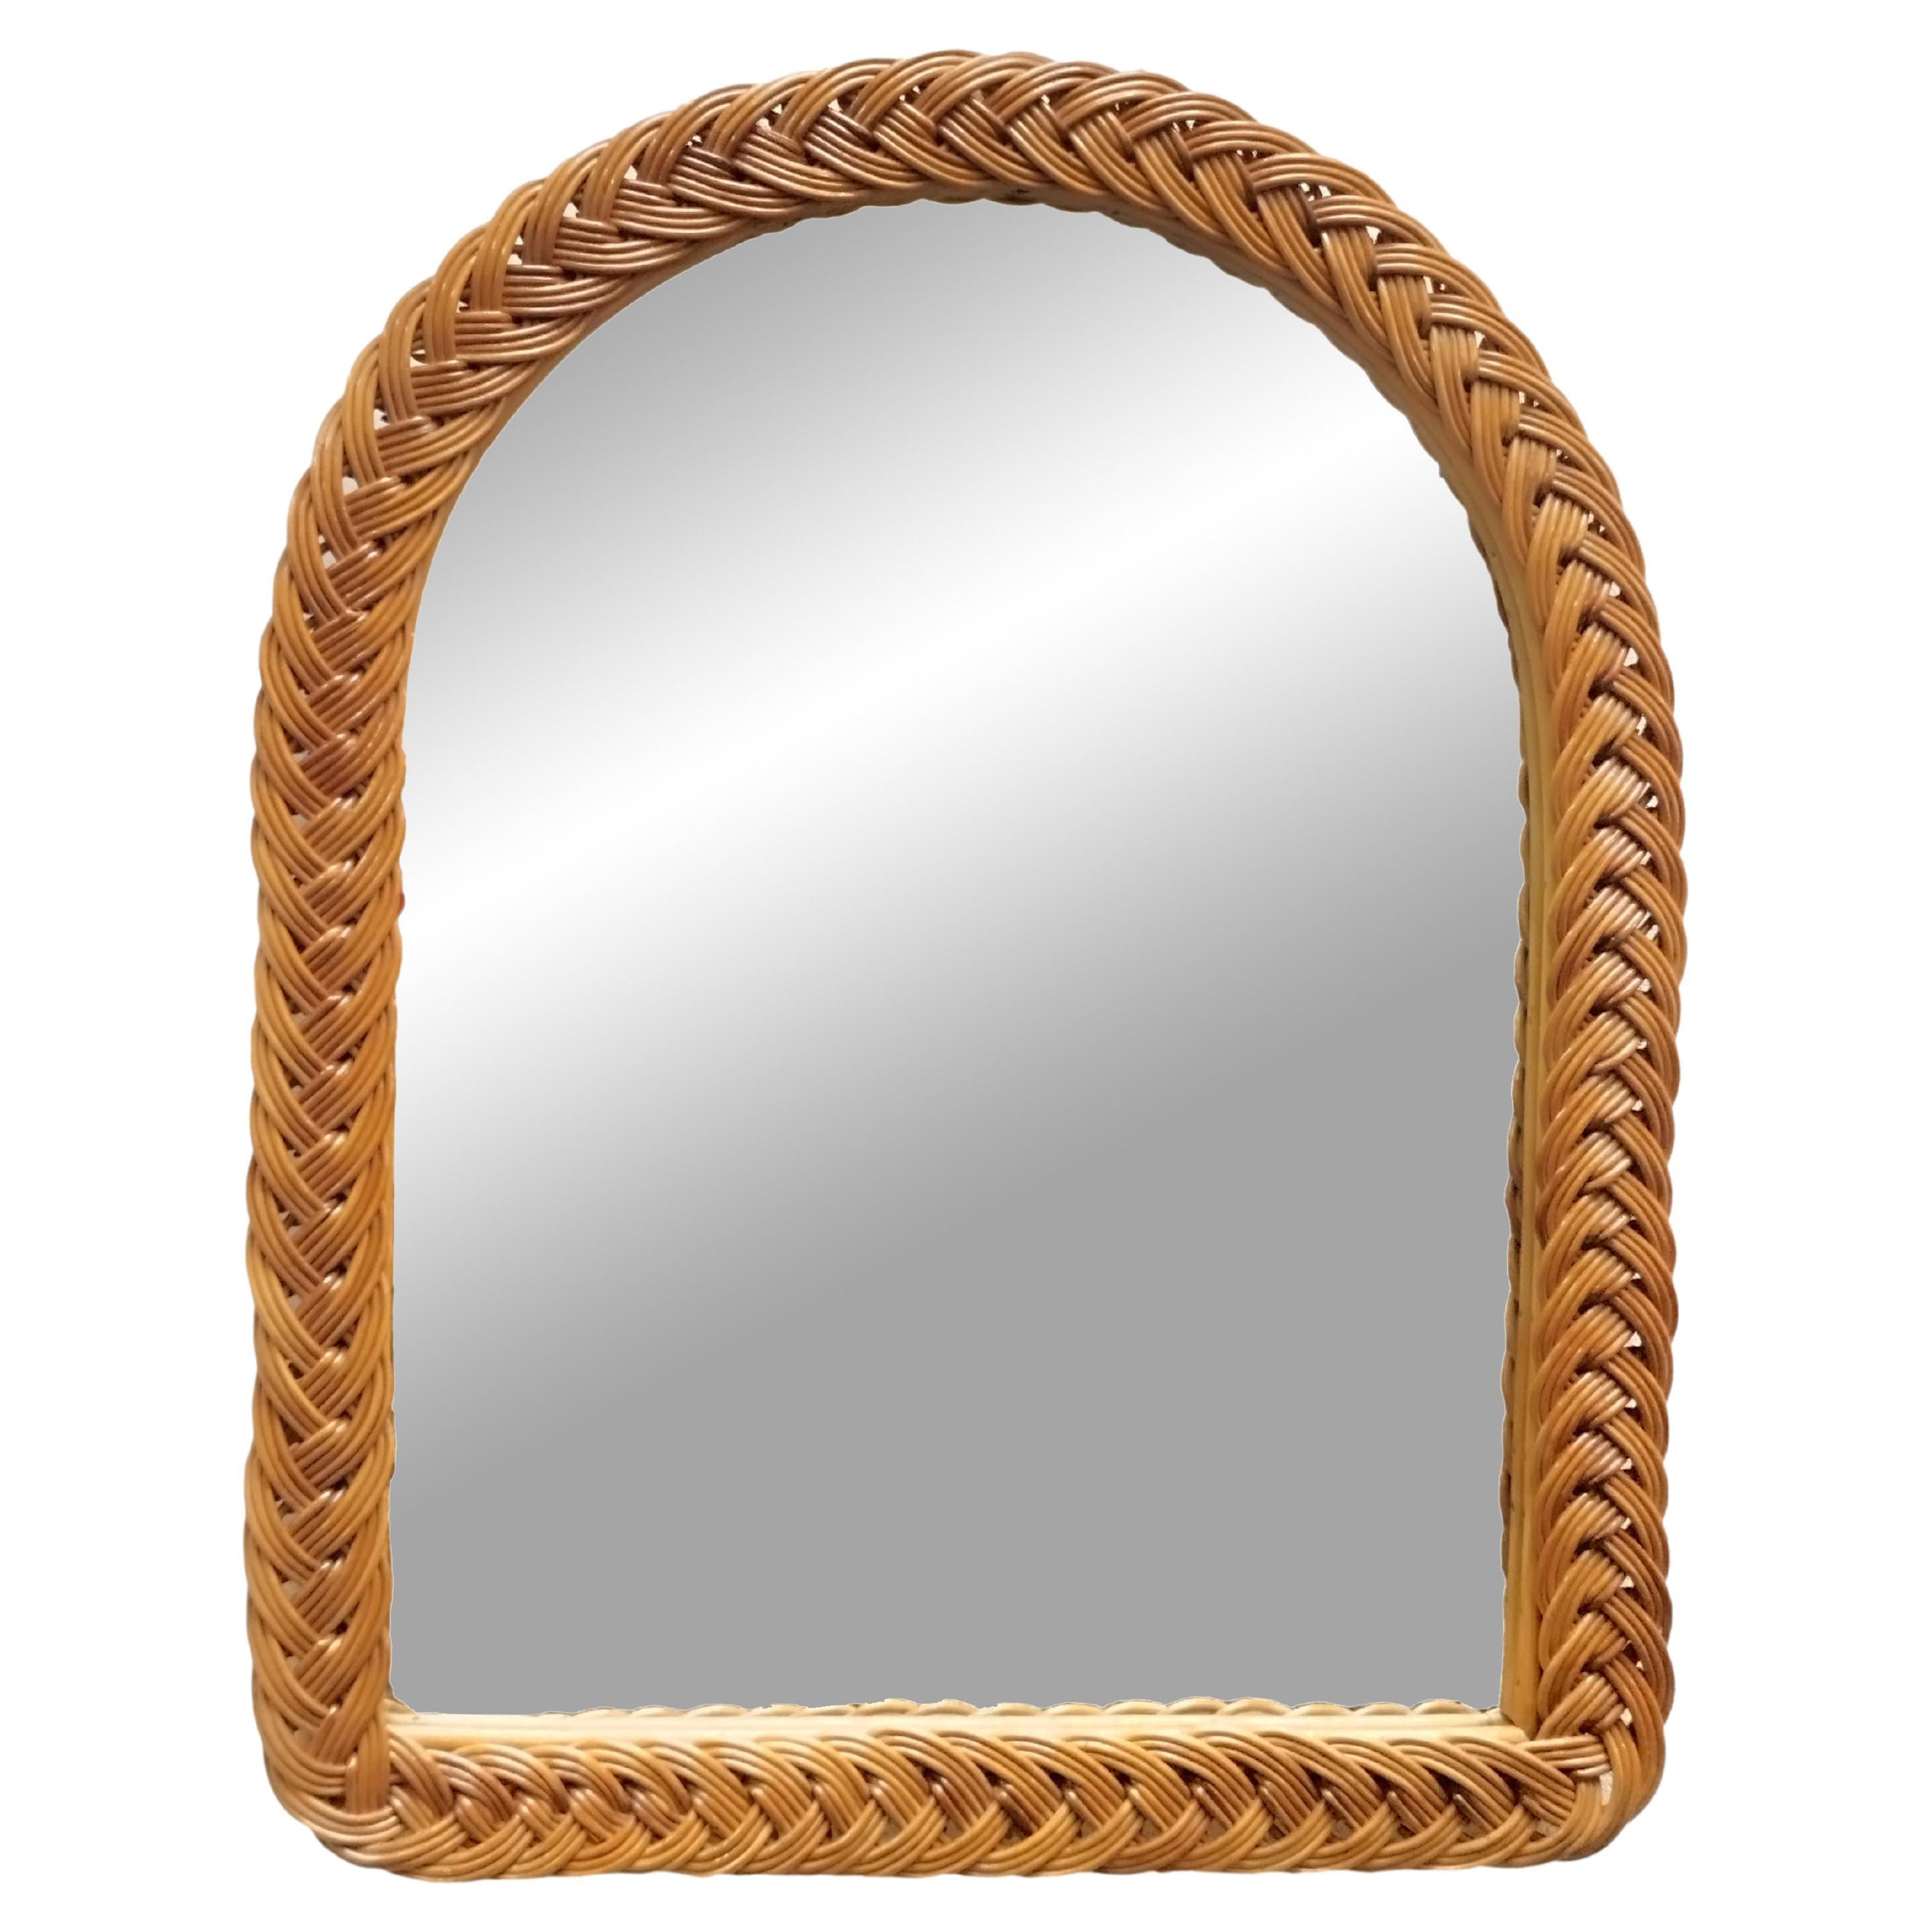 Woven Wicker Arched Wall Mirror Italy 1960s